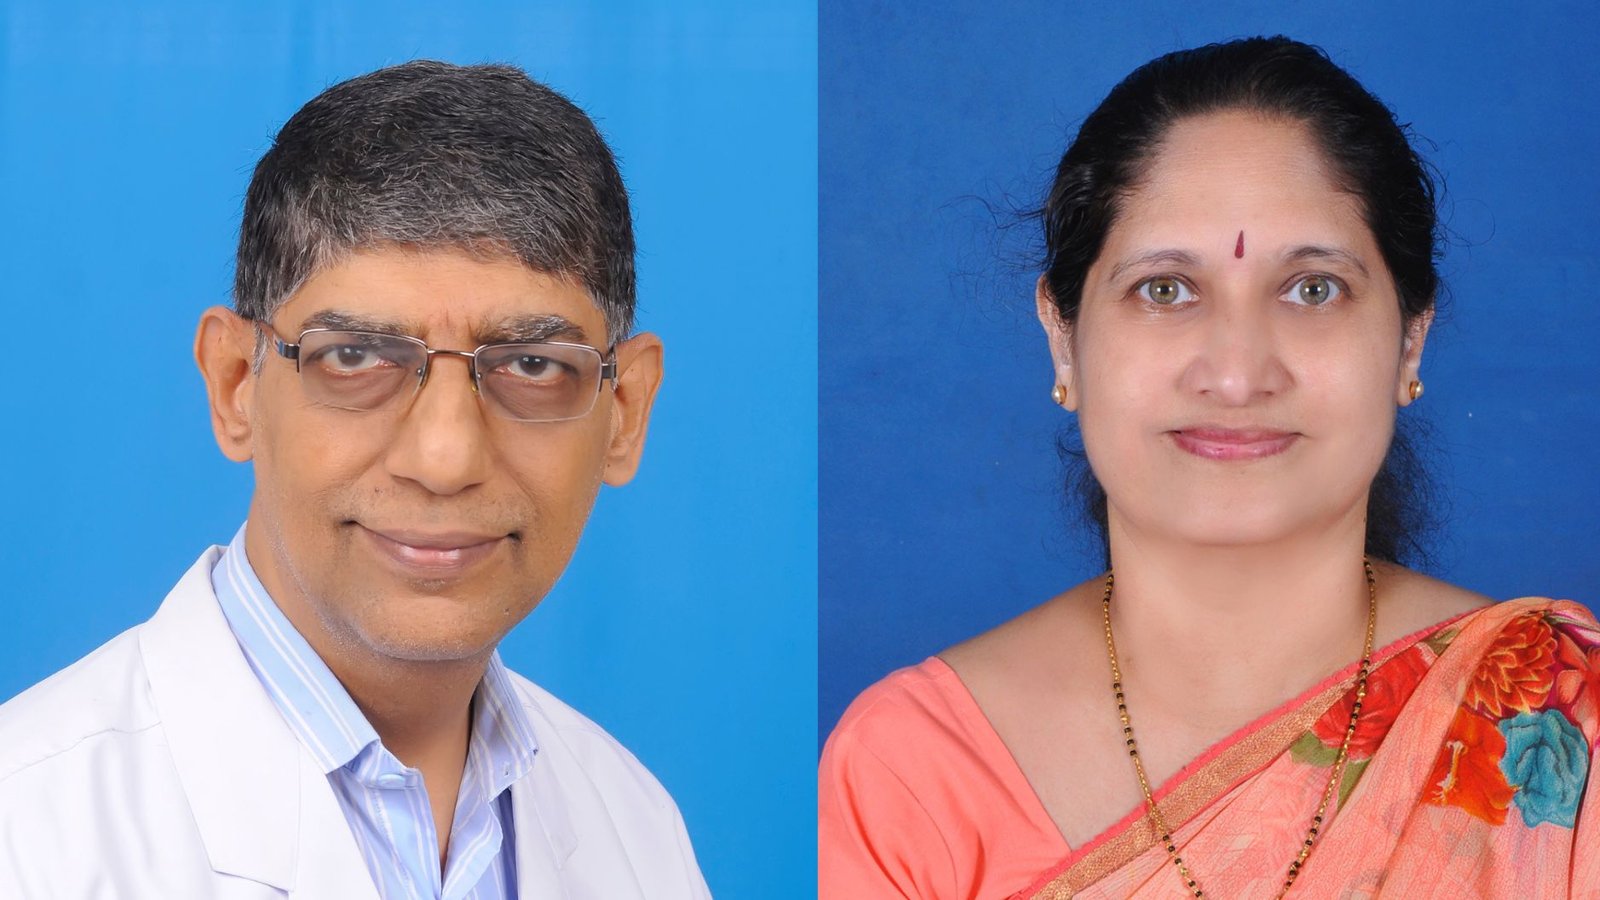 Dr S R Narahari and Dr K S Prasanna of Institute of Applied Dermatology in Kasargod, Kerala